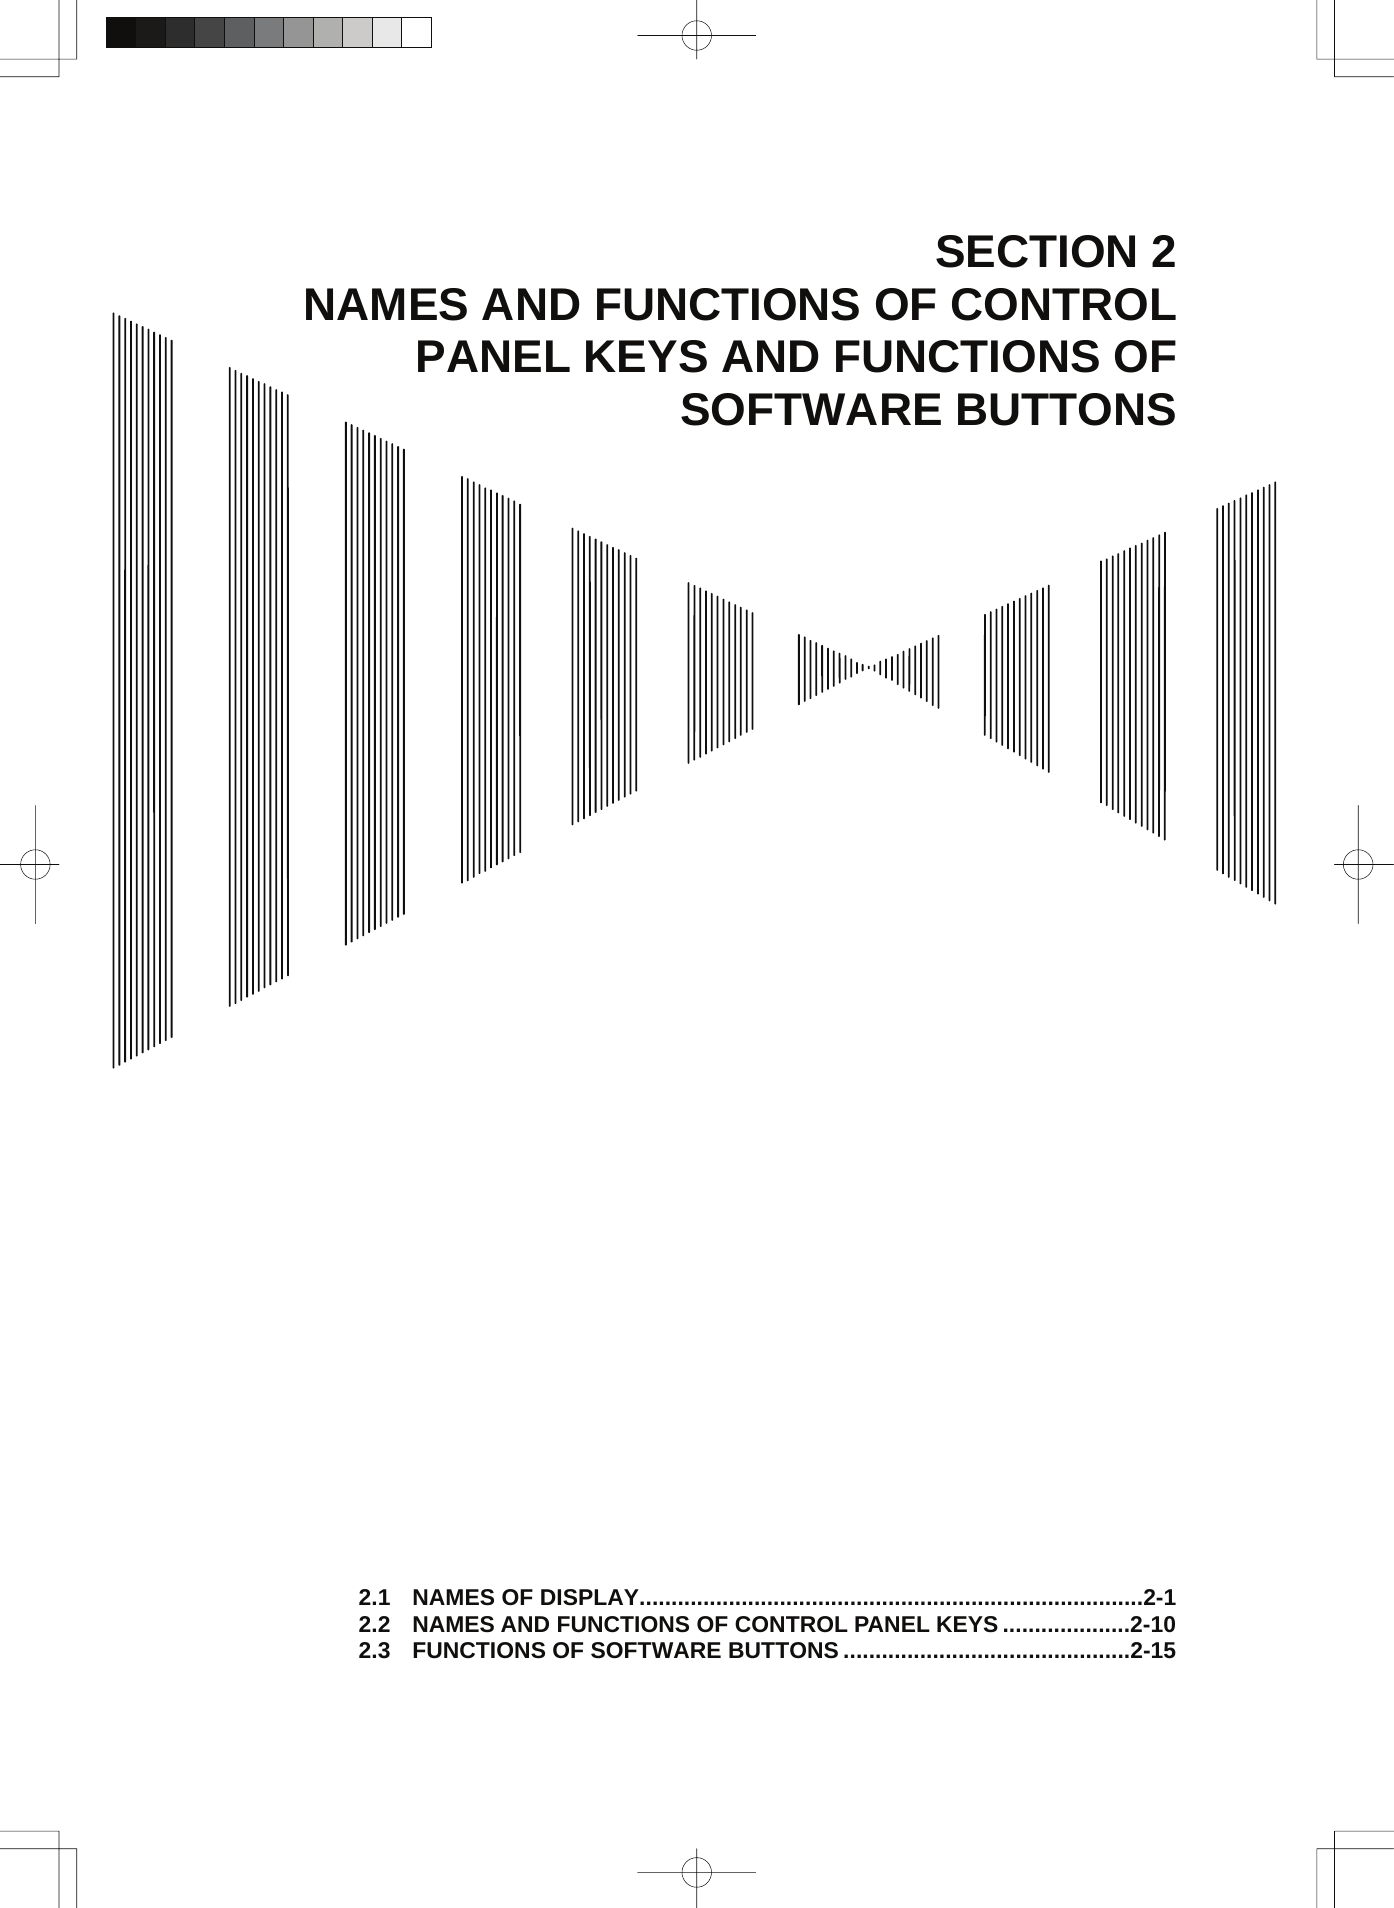  SECTION 2 NAMES AND FUNCTIONS OF CONTROL PANEL KEYS AND FUNCTIONS OF SOFTWARE BUTTONS                                                 2.1 NAMES OF DISPLAY...............................................................................2-1 2.2 NAMES AND FUNCTIONS OF CONTROL PANEL KEYS ....................2-10 2.3 FUNCTIONS OF SOFTWARE BUTTONS .............................................2-15 